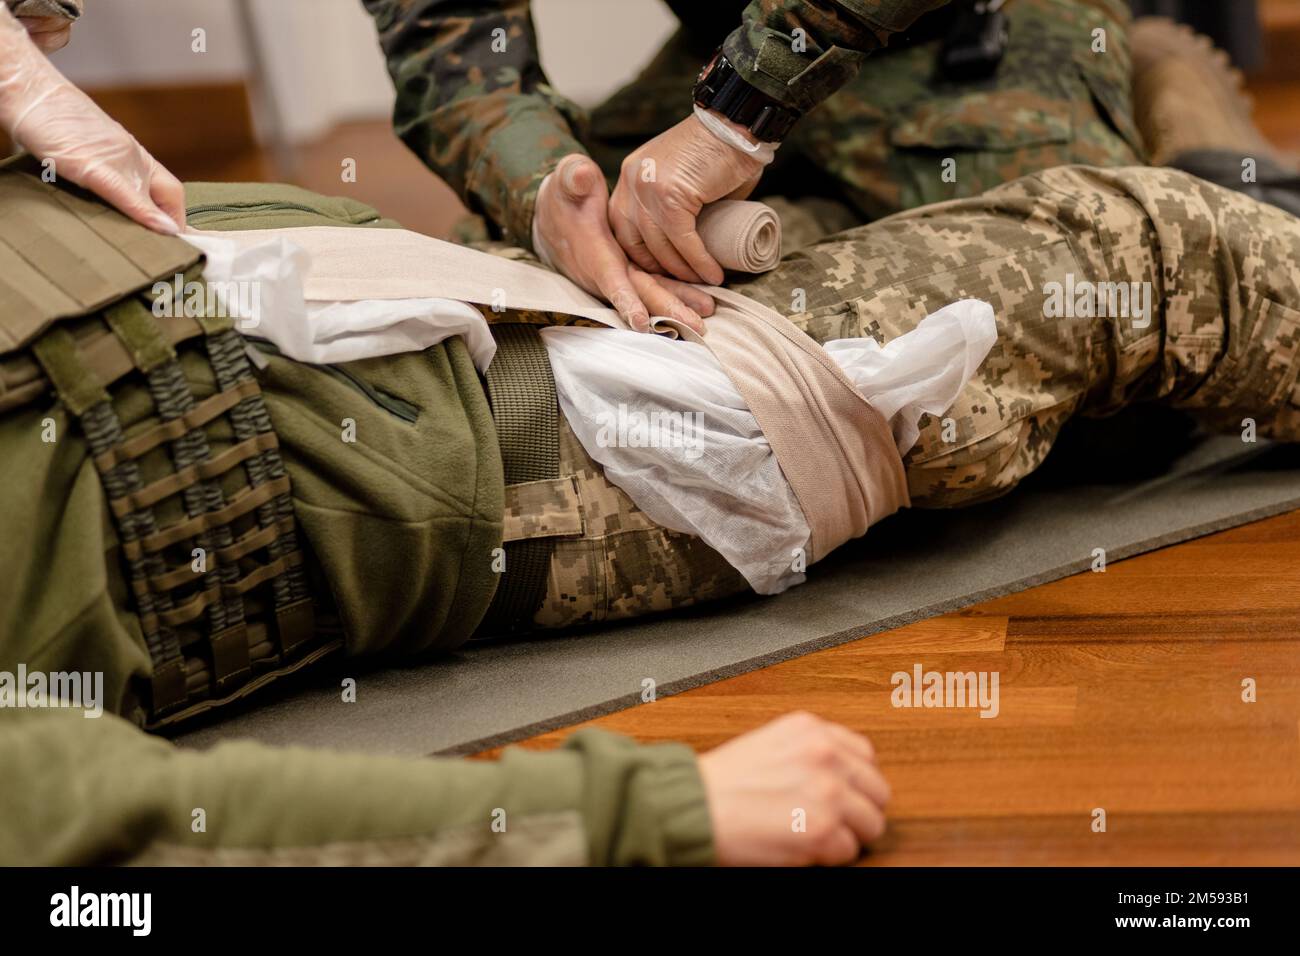 Training dressing of the wounded leg of a Ukrainian fighter, close-up. Stock Photo